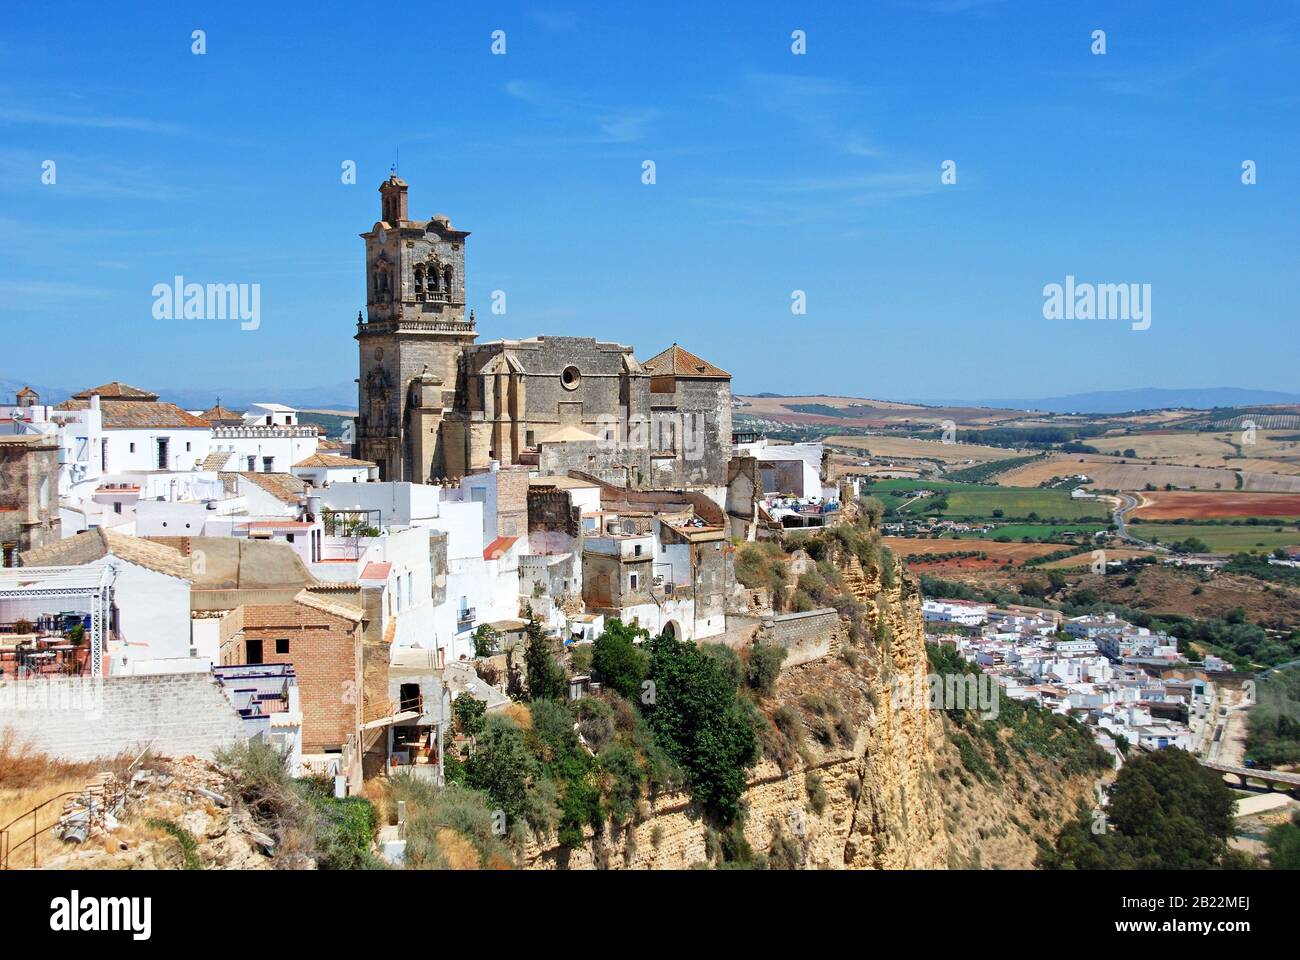 View of St Peters Church and the old town, Arcos de la Frontera, Andalucia, Spain. Stock Photo